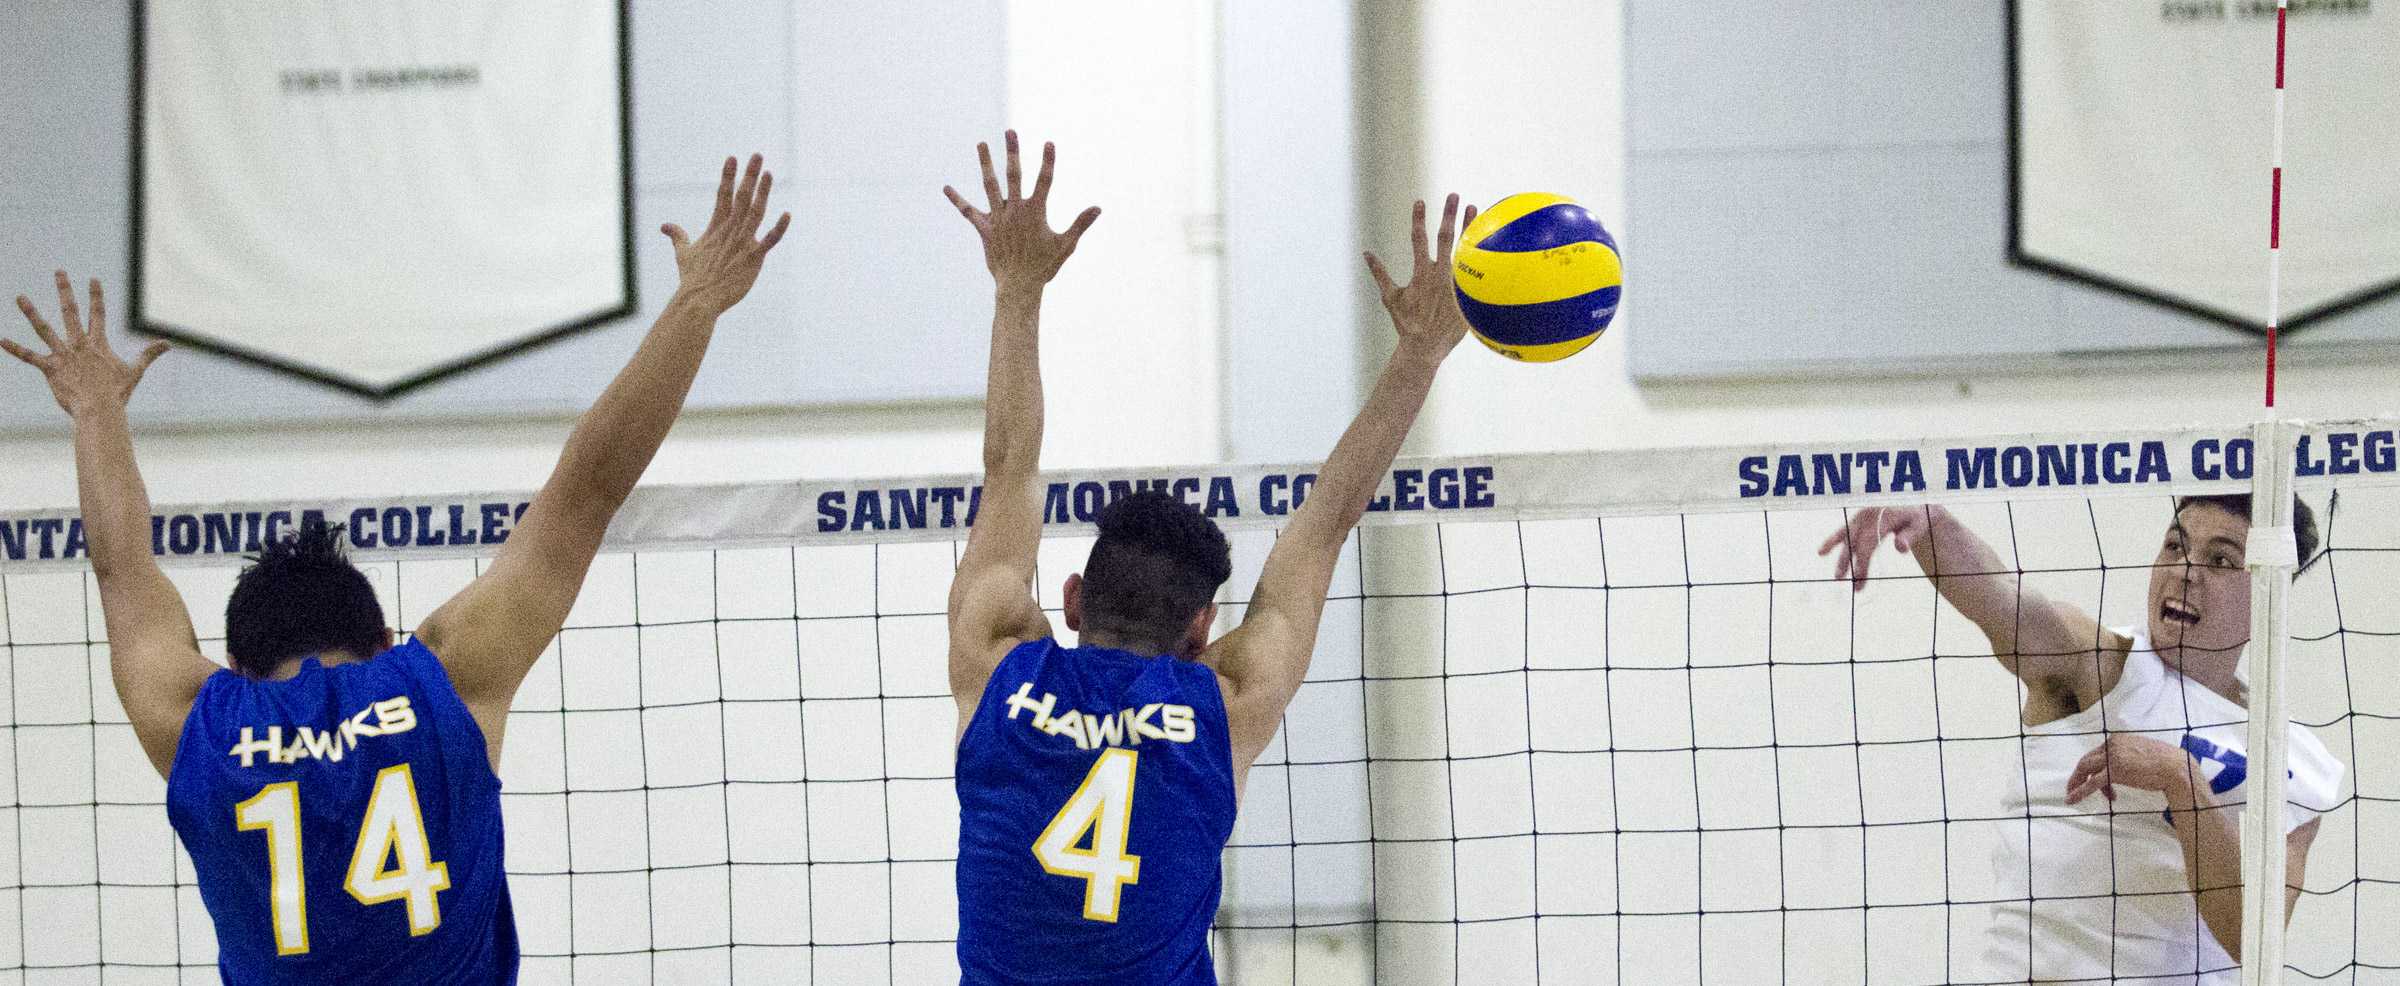  Santiago Canyon College Hawks freshman middle blocker Gustavo Marquez (14, left) and Santiago Canyon College Hawks freshman setter Christopher Solares (4, middle) attempt to block the attack of Santa Monica College Corsairs freshman outside hitter M